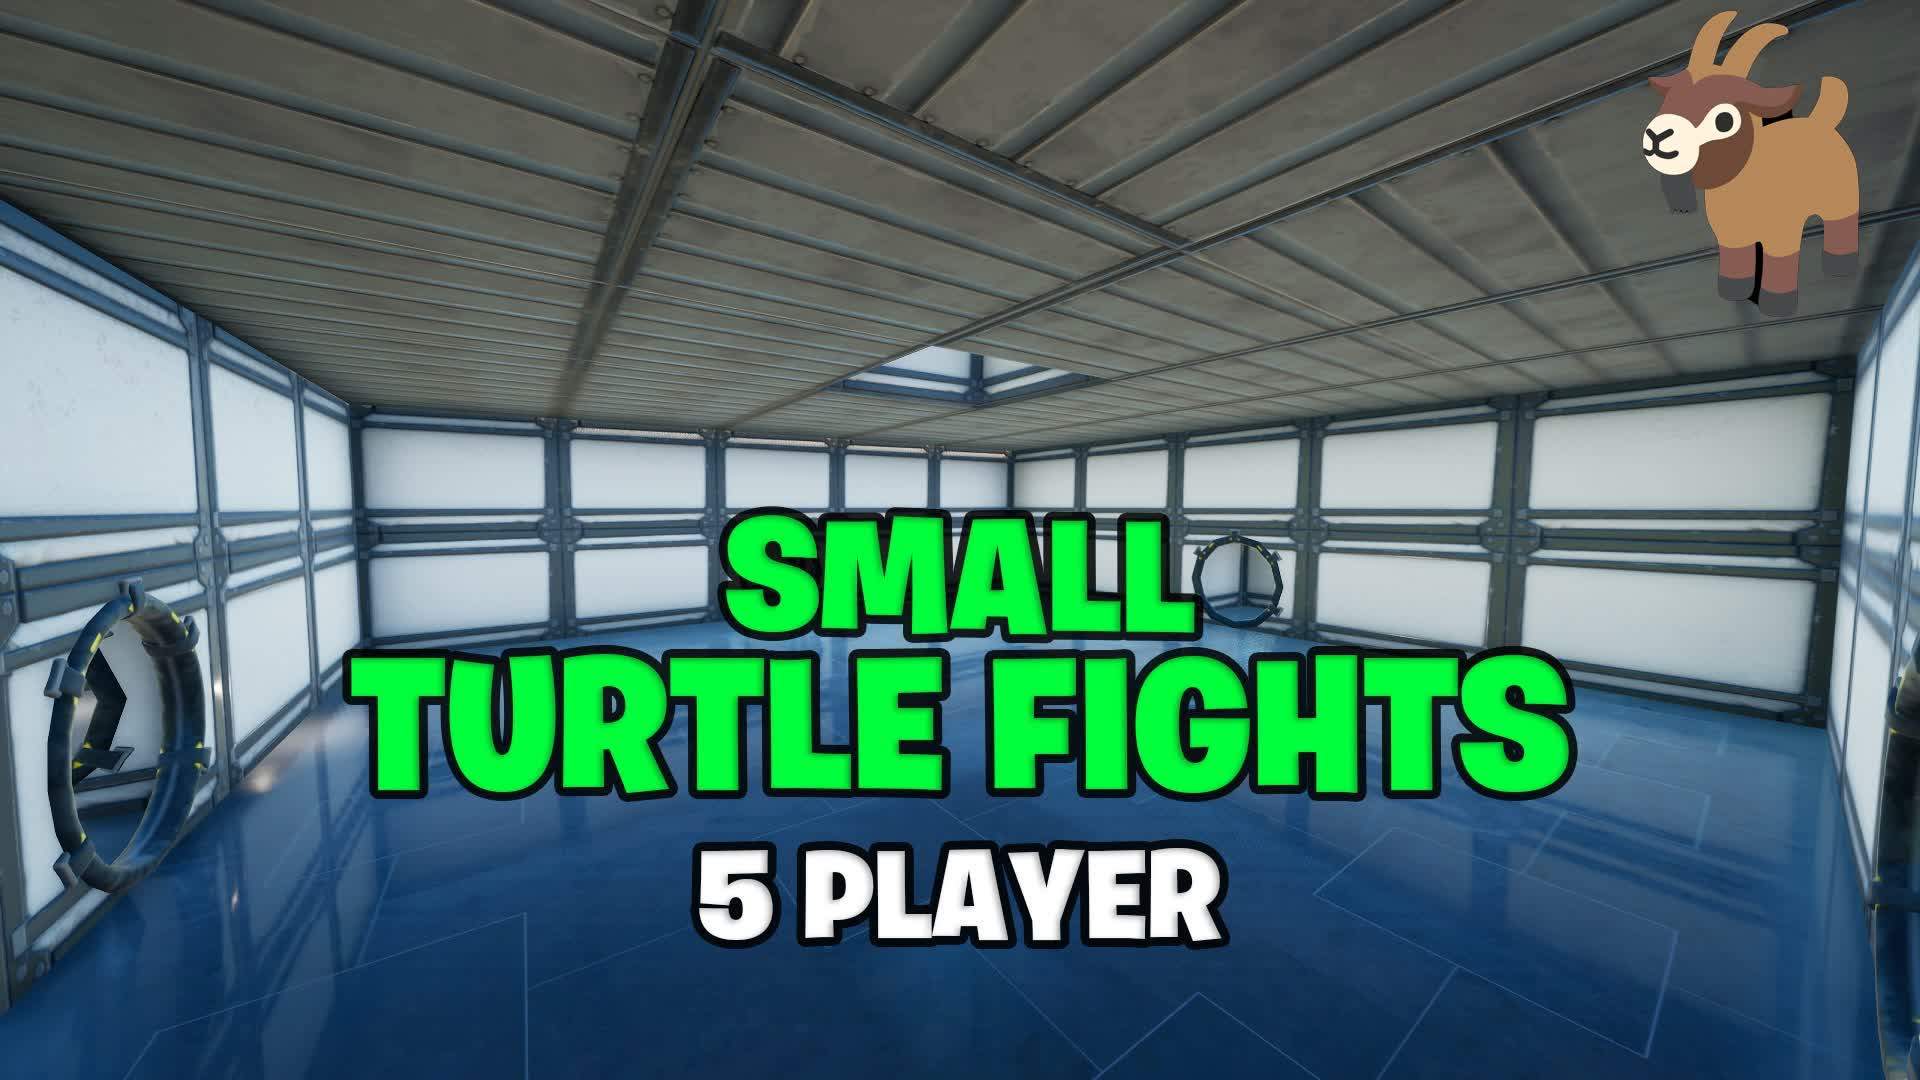 SMALL TURTLE FIGHTS 🐢